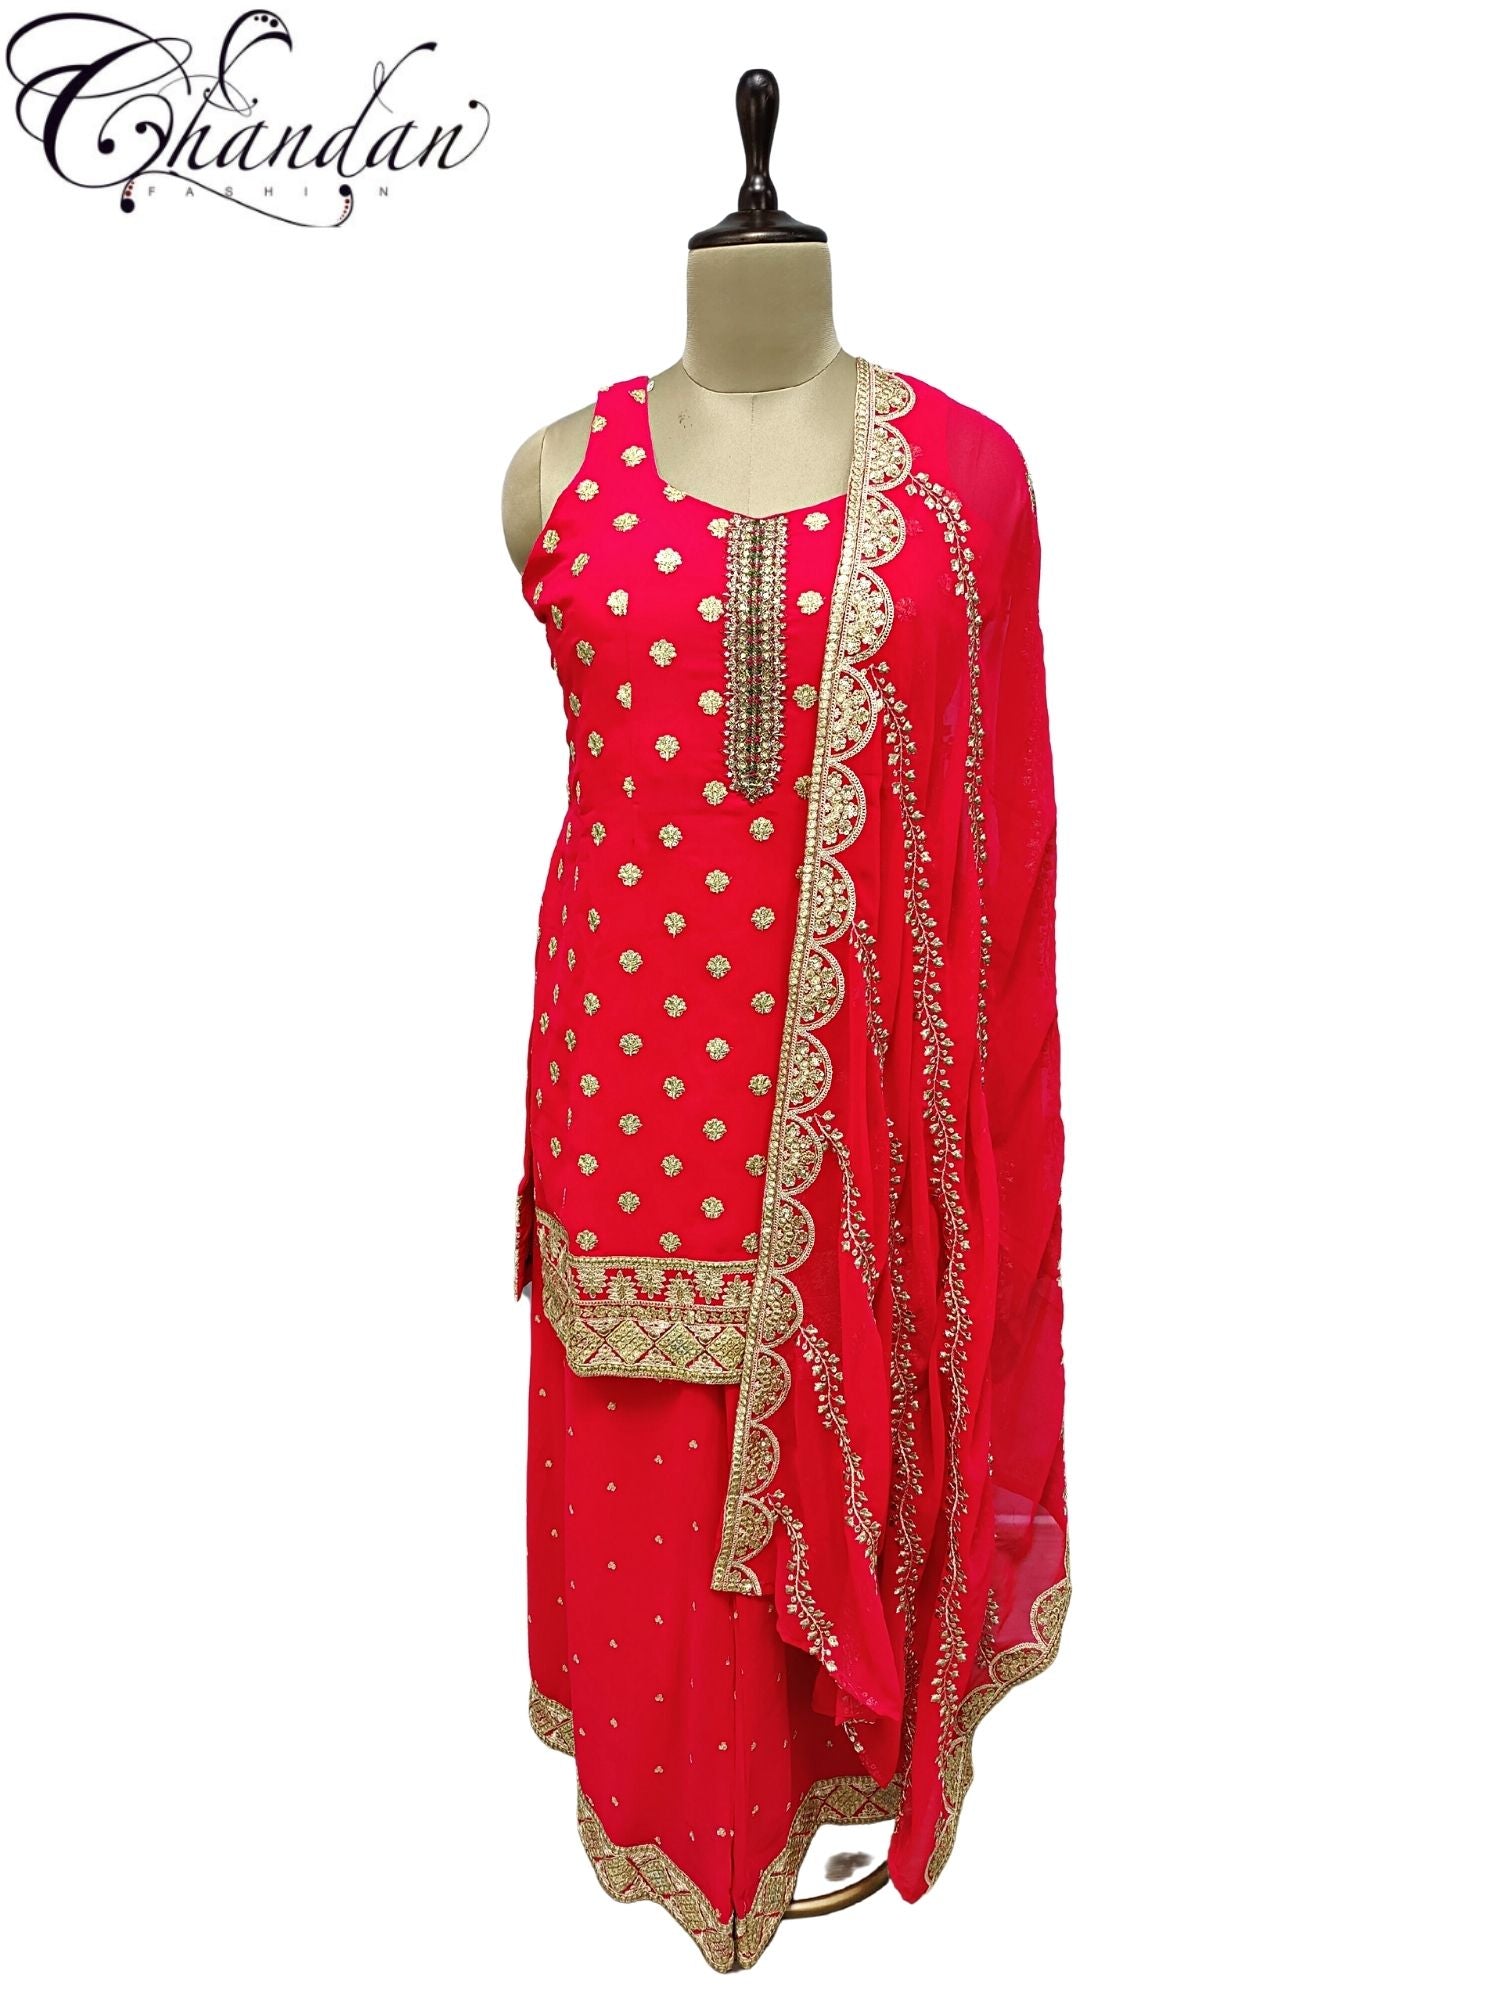 Partywear embroidered palazzo Suit with heavy Dupatta